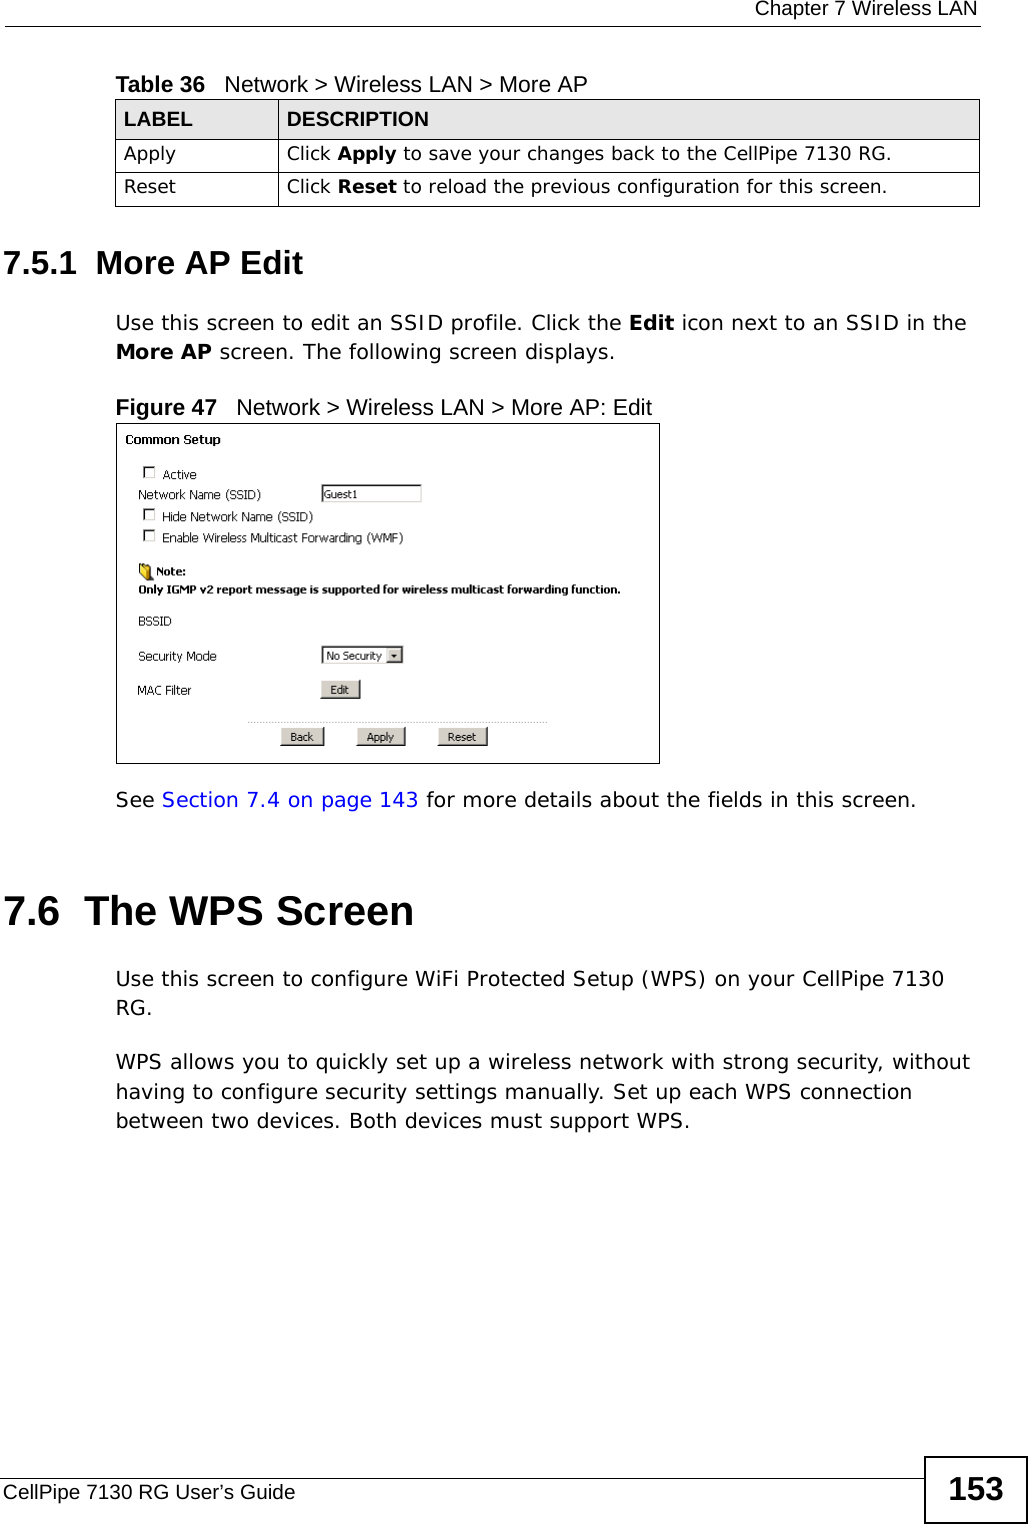  Chapter 7 Wireless LANCellPipe 7130 RG User’s Guide 1537.5.1  More AP EditUse this screen to edit an SSID profile. Click the Edit icon next to an SSID in the More AP screen. The following screen displays.Figure 47   Network &gt; Wireless LAN &gt; More AP: EditSee Section 7.4 on page 143 for more details about the fields in this screen.7.6  The WPS Screen Use this screen to configure WiFi Protected Setup (WPS) on your CellPipe 7130 RG.WPS allows you to quickly set up a wireless network with strong security, without having to configure security settings manually. Set up each WPS connection between two devices. Both devices must support WPS. Apply Click Apply to save your changes back to the CellPipe 7130 RG.Reset Click Reset to reload the previous configuration for this screen.Table 36   Network &gt; Wireless LAN &gt; More APLABEL DESCRIPTION